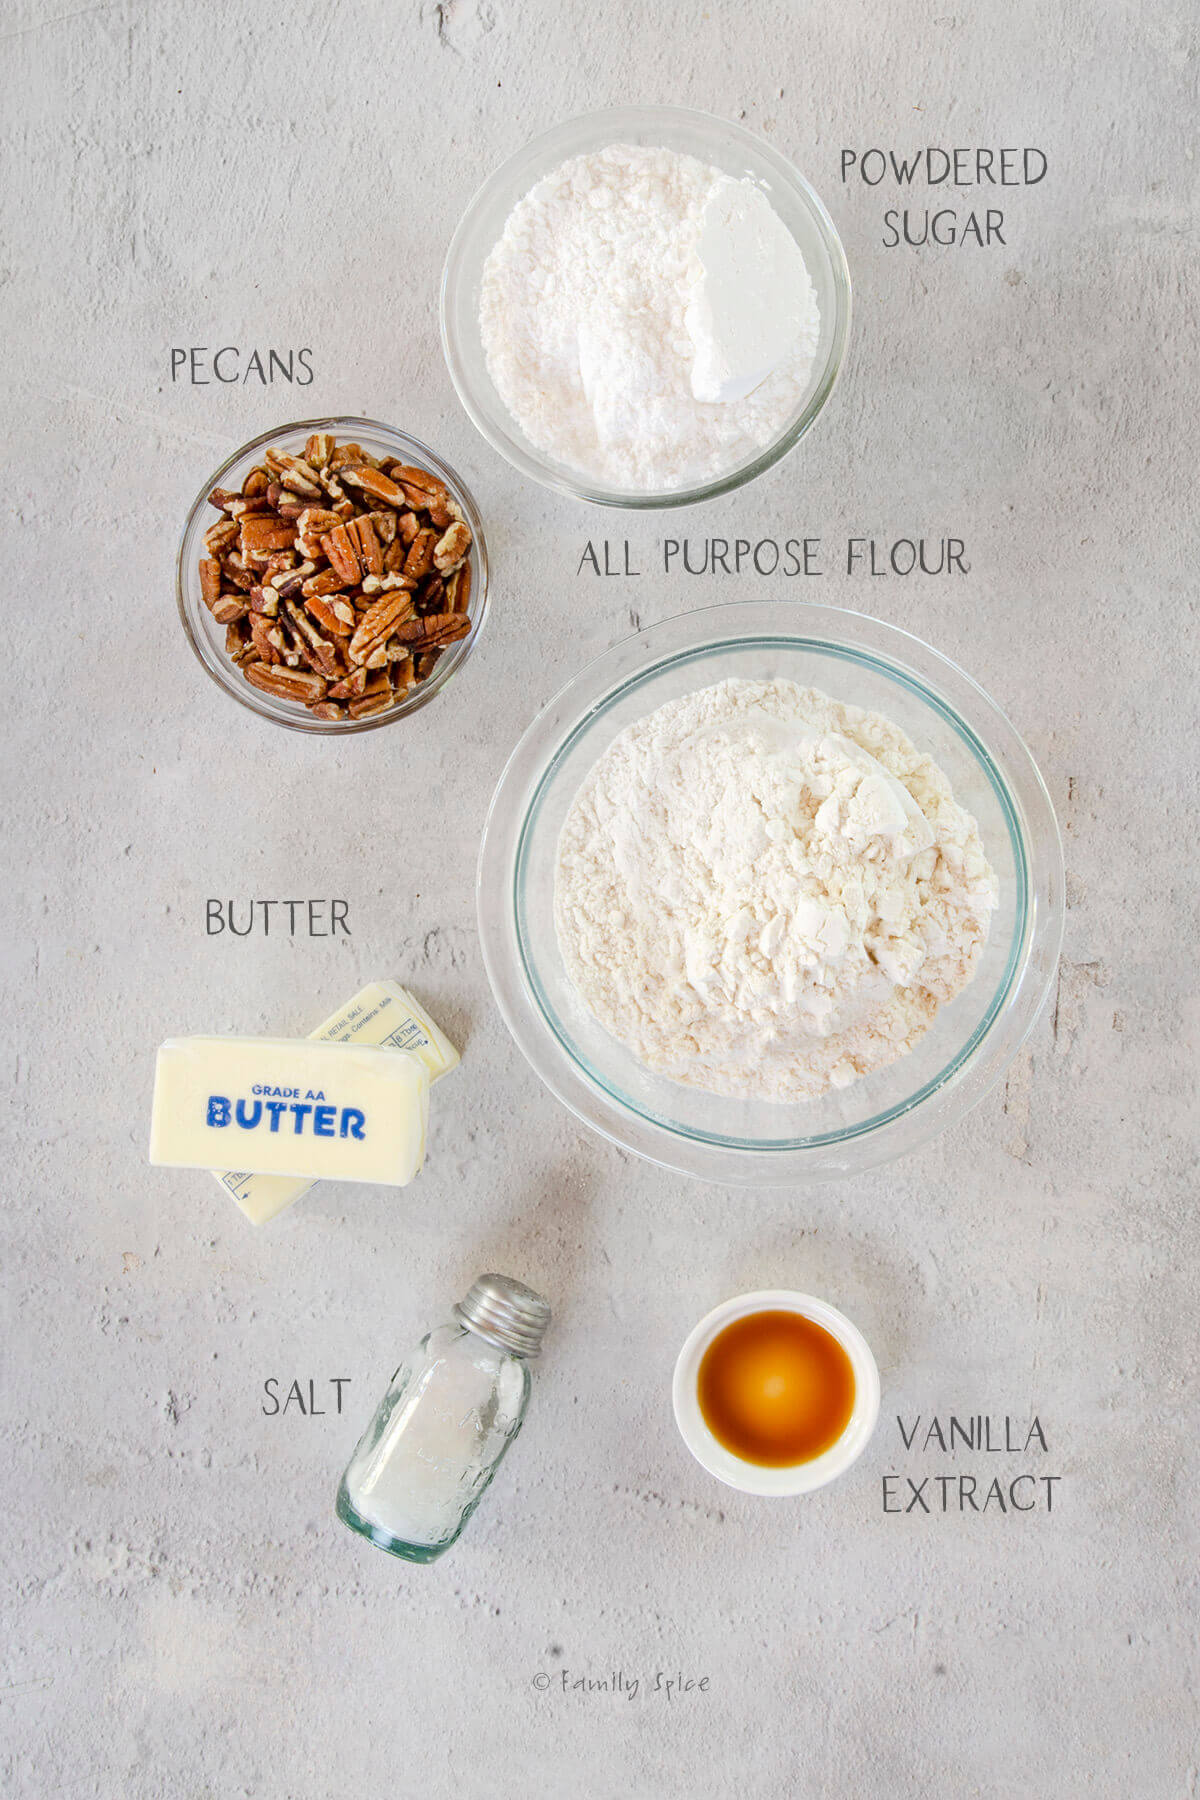 Ingredients labeled and needed to make sand tarts